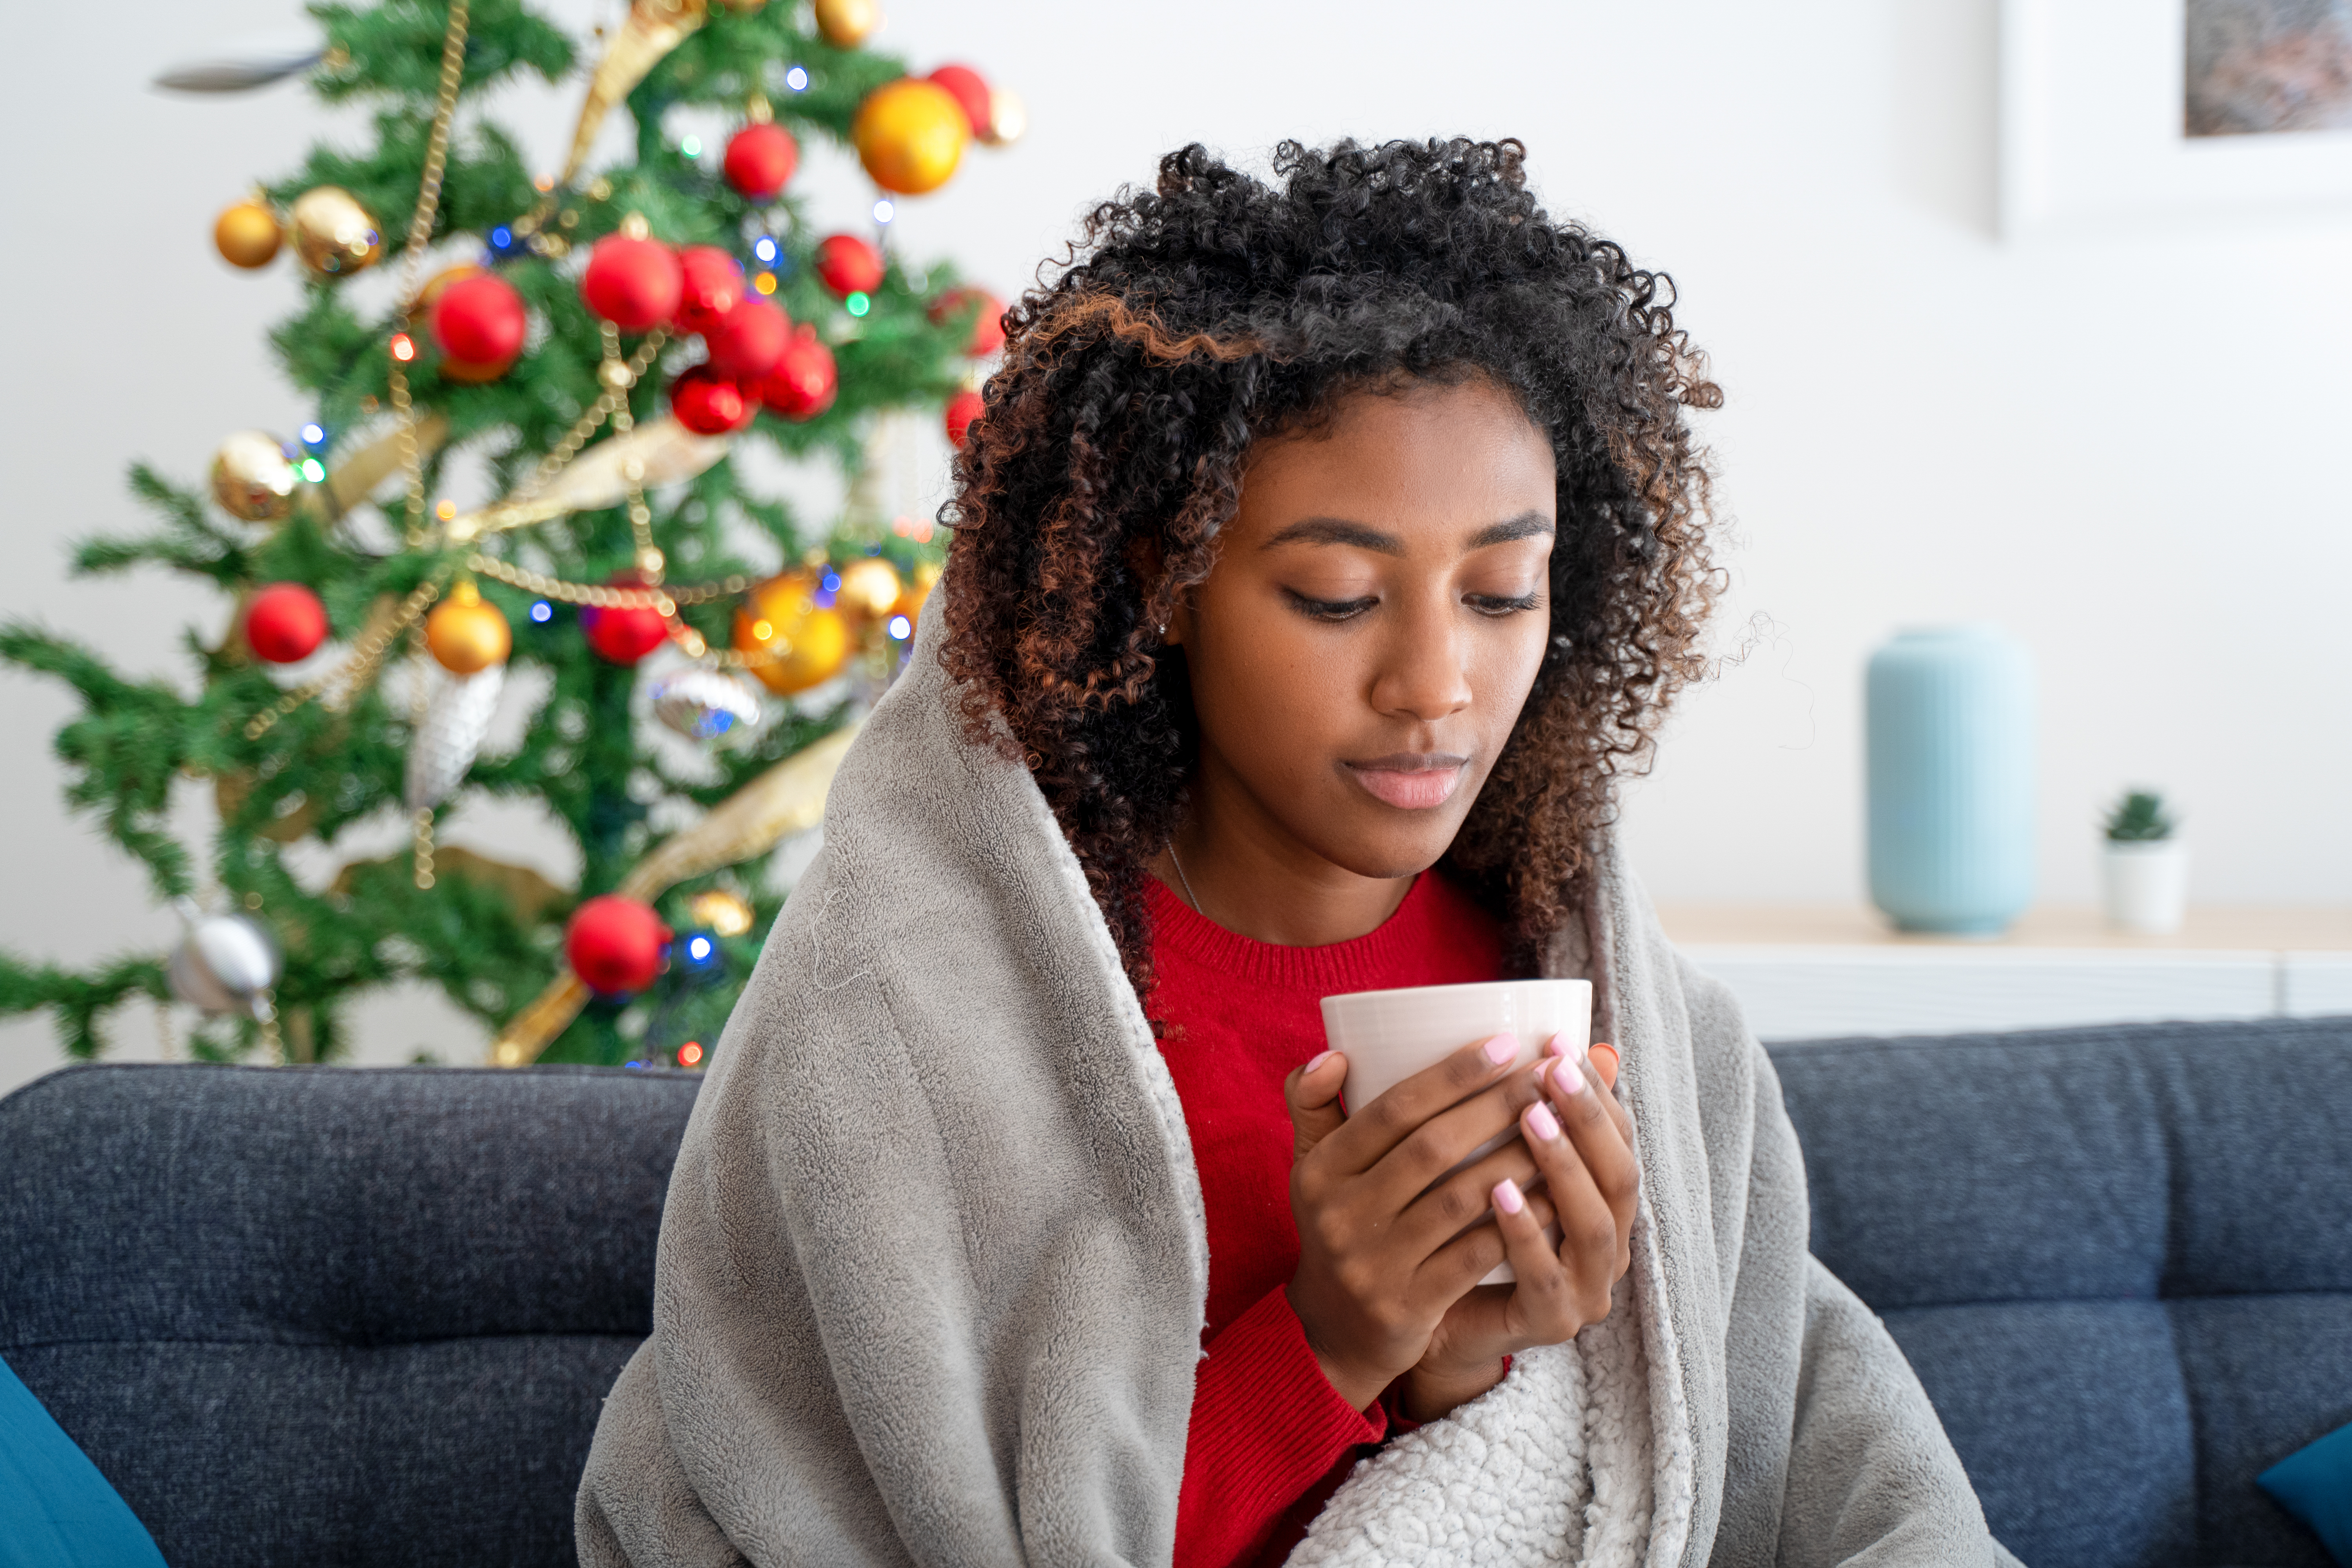 Holiday Depression is Real and It's Okay to be Sad